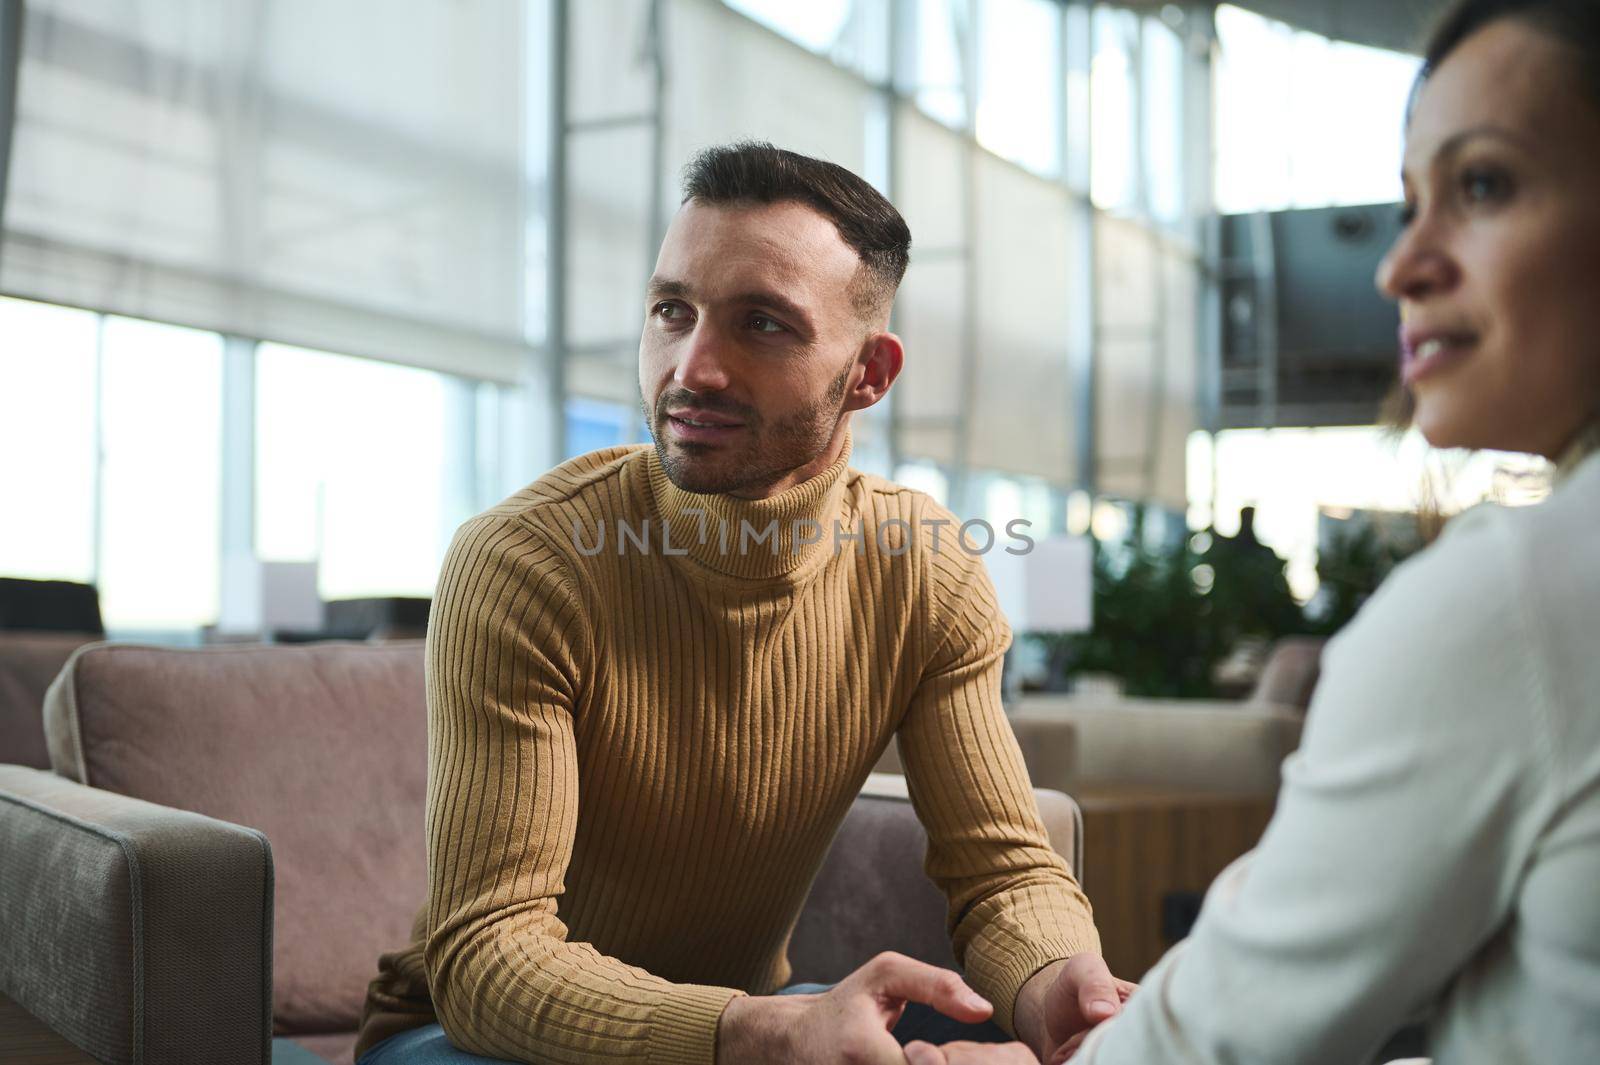 Focus on handsome Arabic man in pullover looking away, holding hands of his girlfriend, sitting together in chair in VIP lounge at international airport against panoramic windows overlooking runway